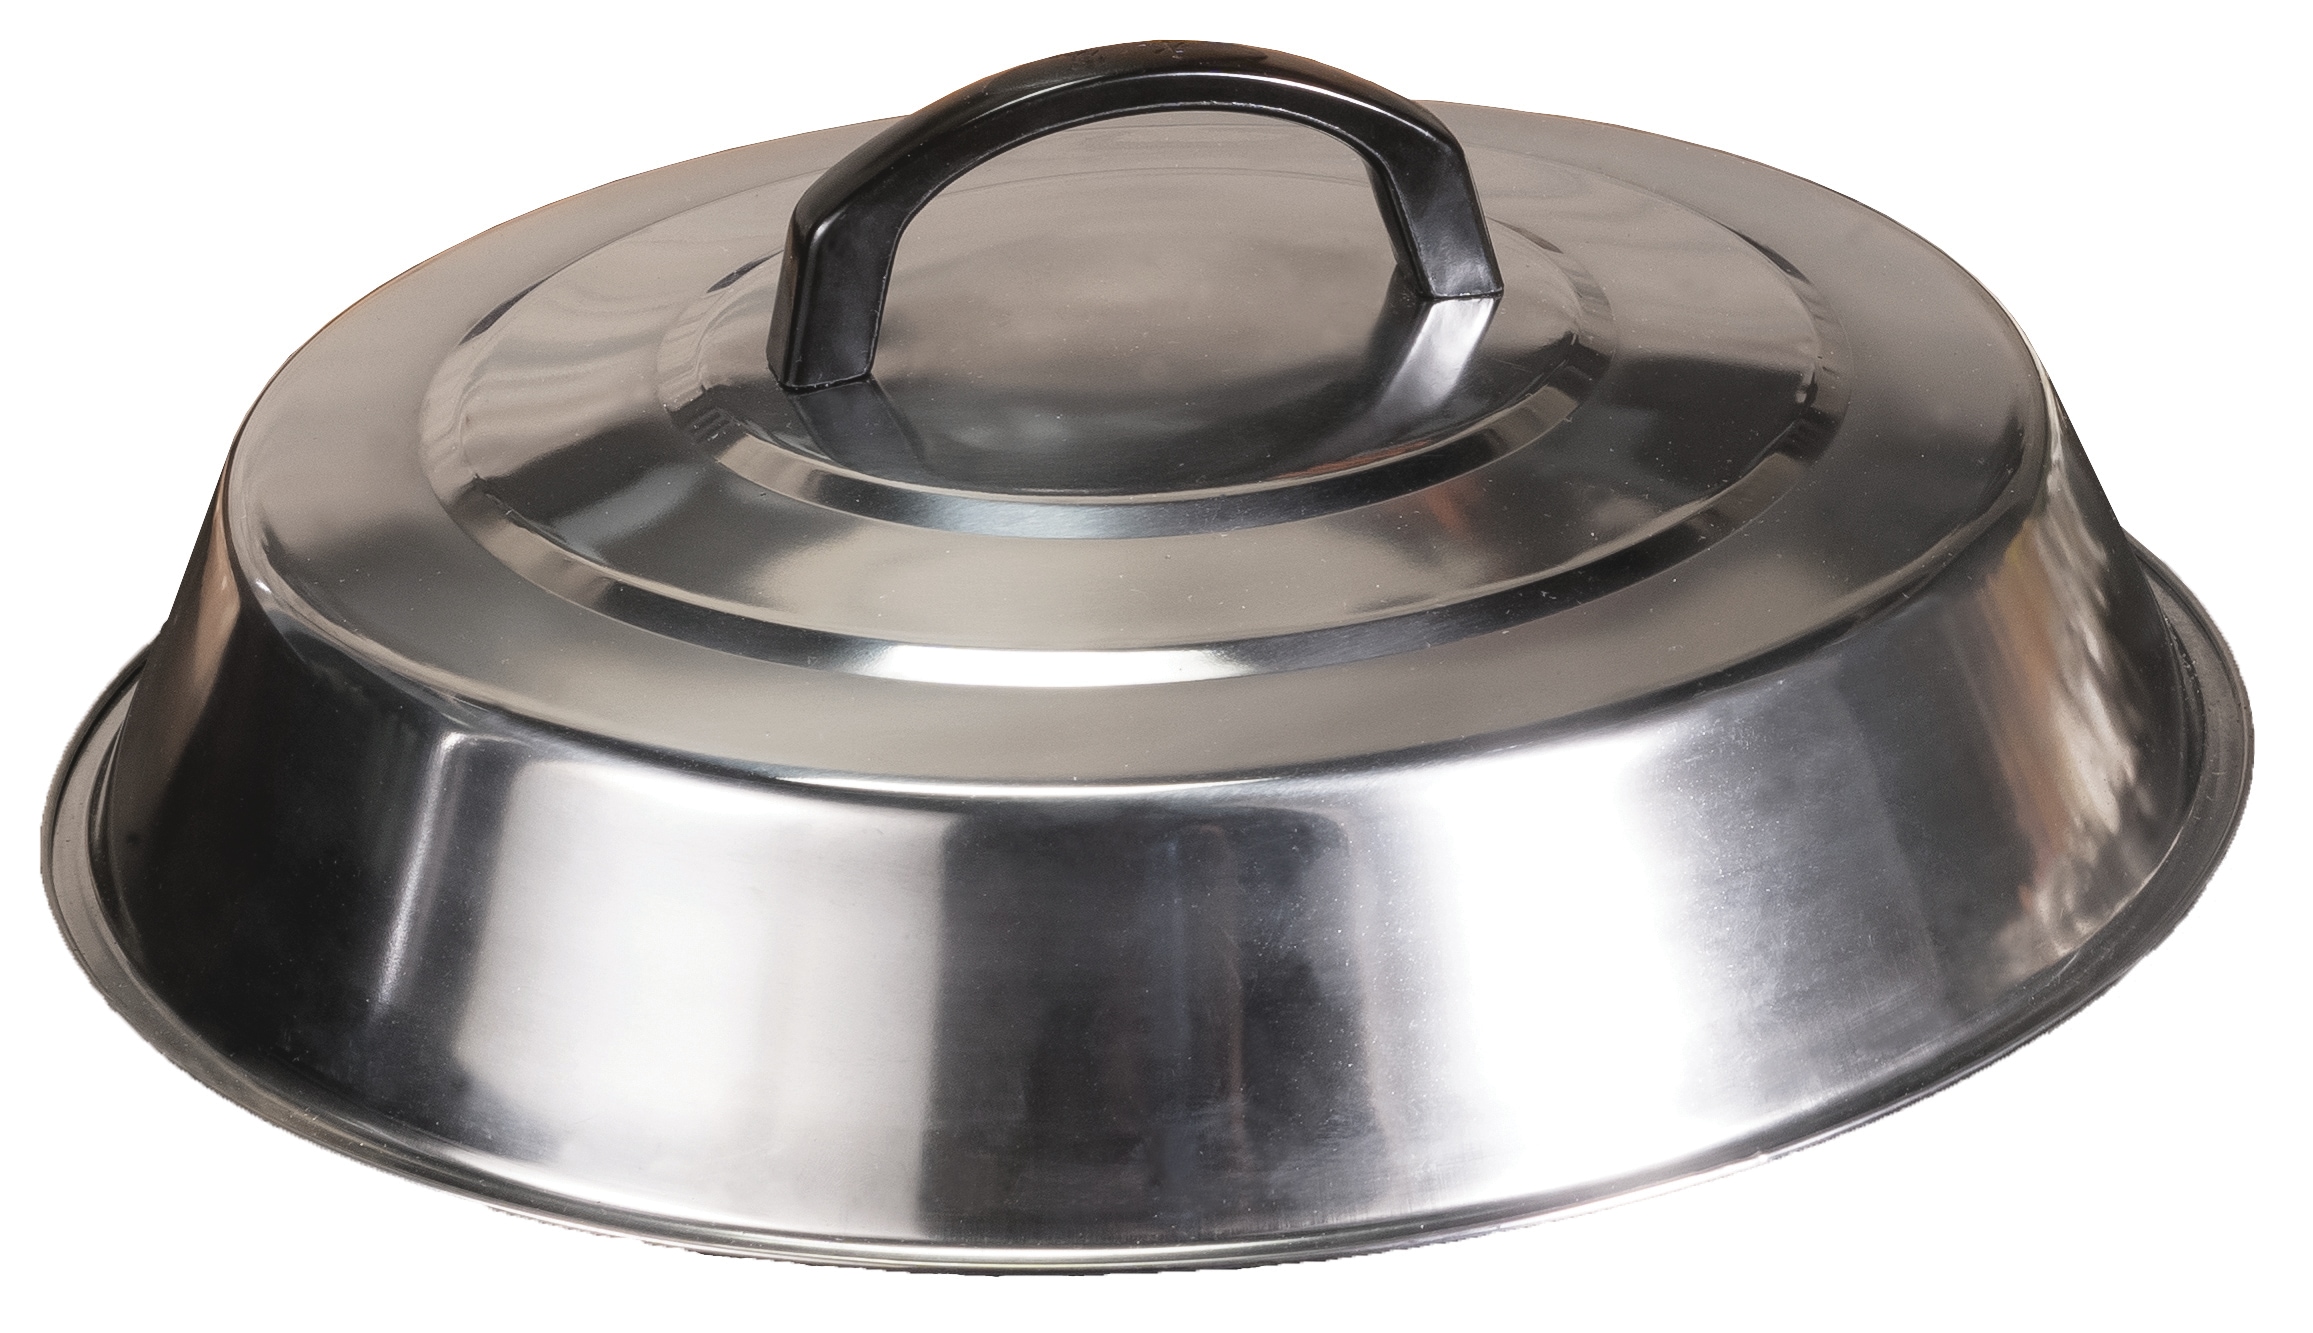 Cover Stainless Steel Round Grilling Flat Splatter Pot Screen